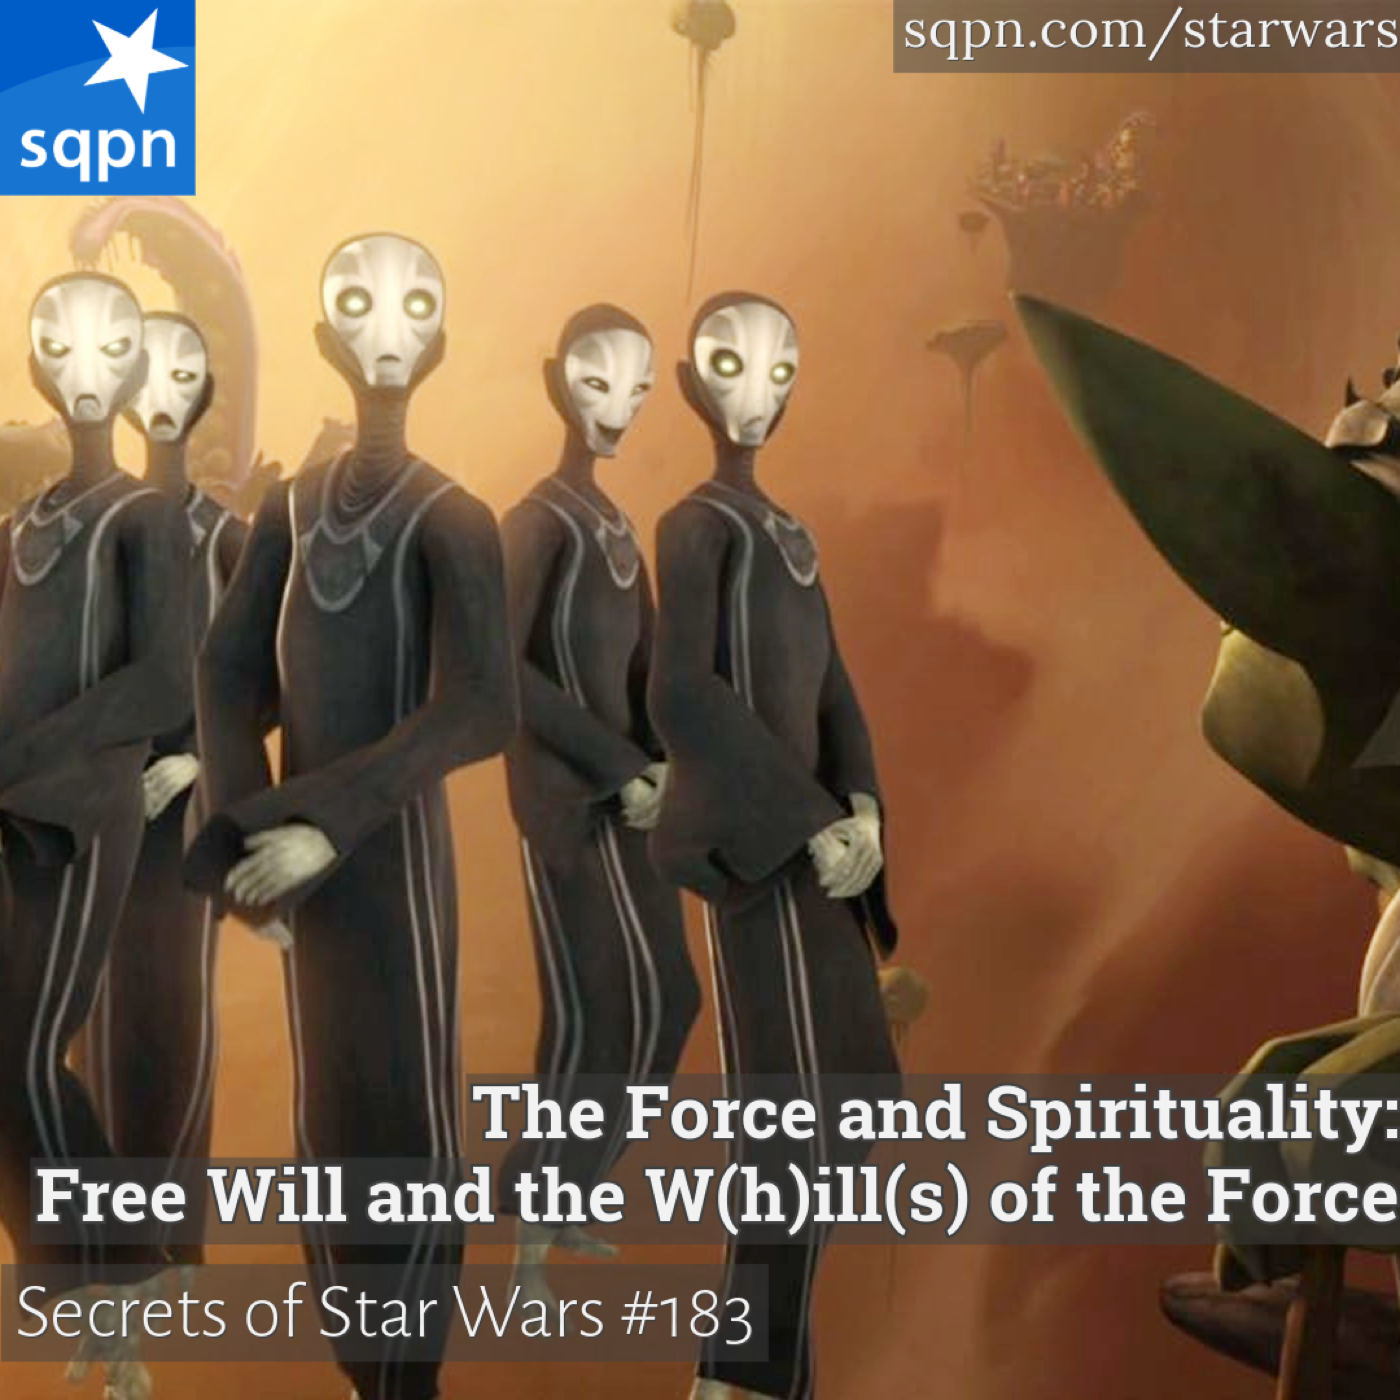 The Force and Spirituality: Free Will and the W(h)ill(s) of the Force